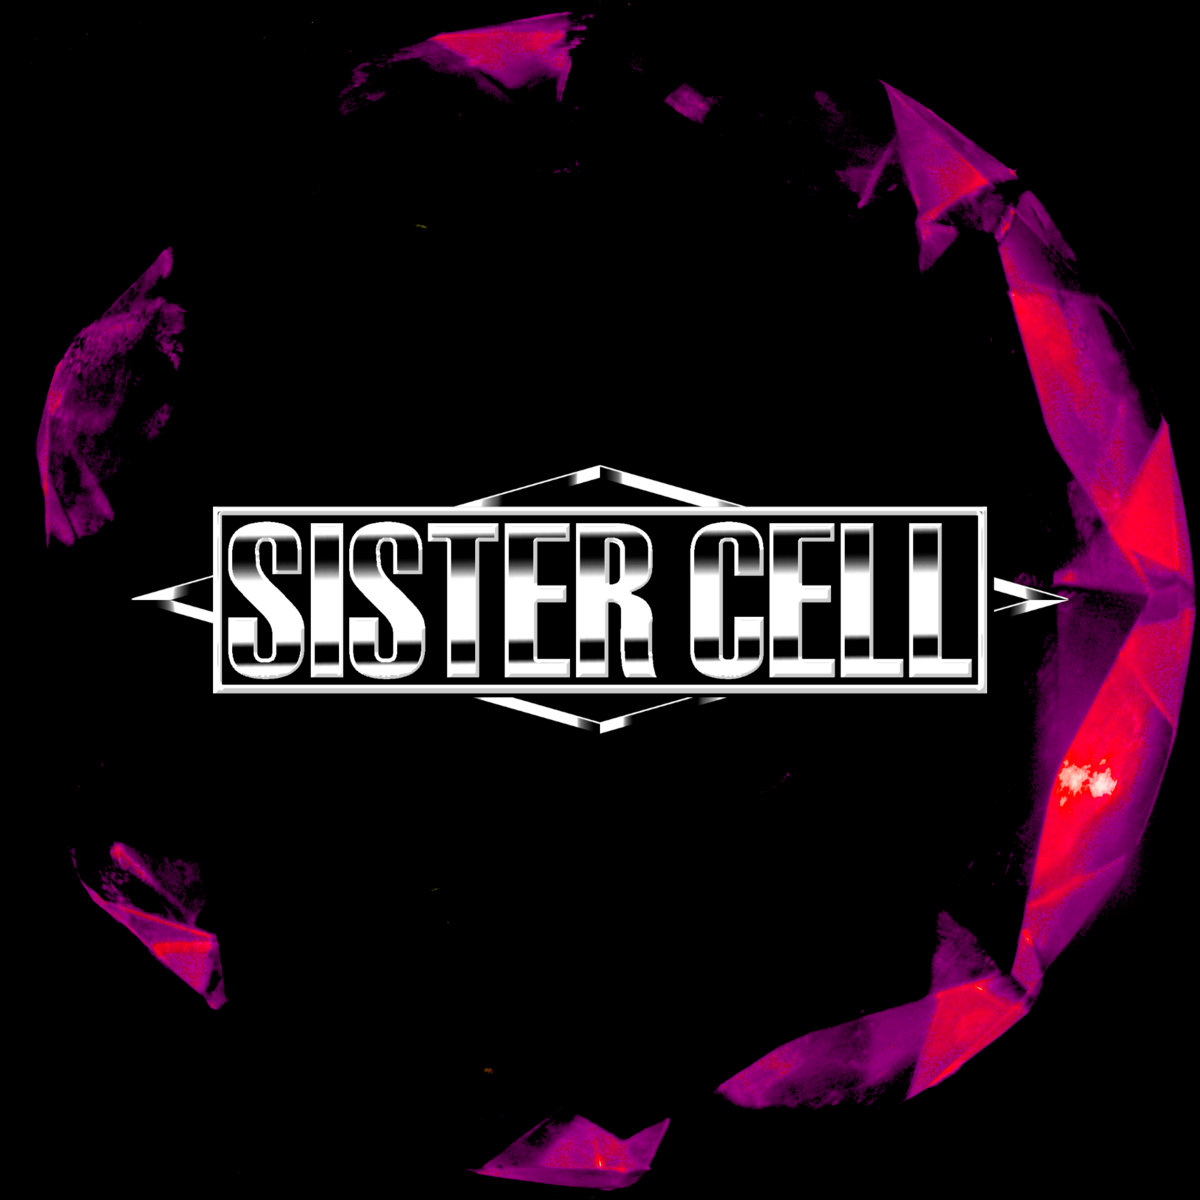 Sister Cell – Philosopher’s Stone